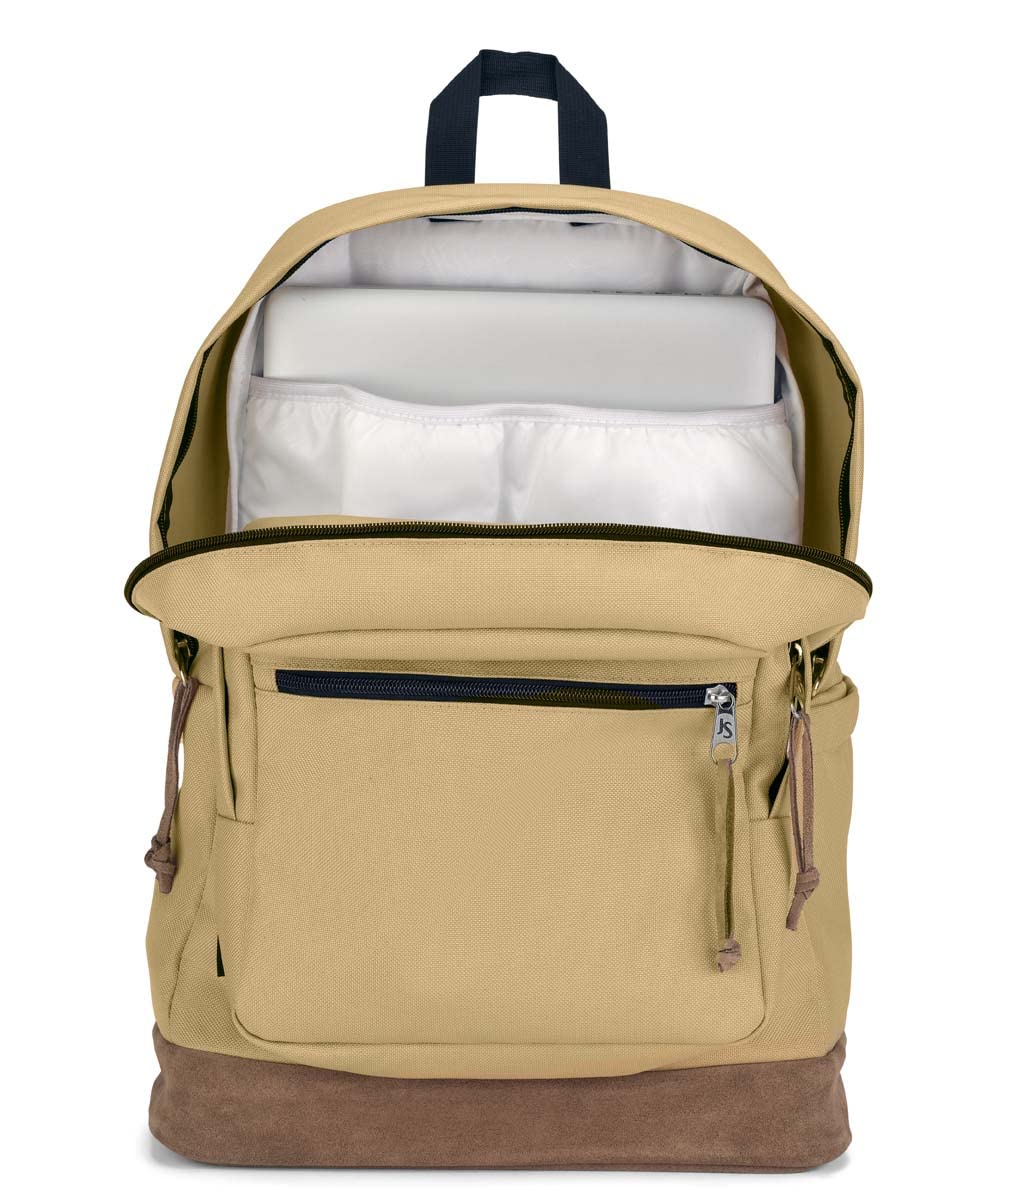 JanSport Right Pack Backpack - Travel, Work, or Laptop Bookbag with Leather Bottom, Curry